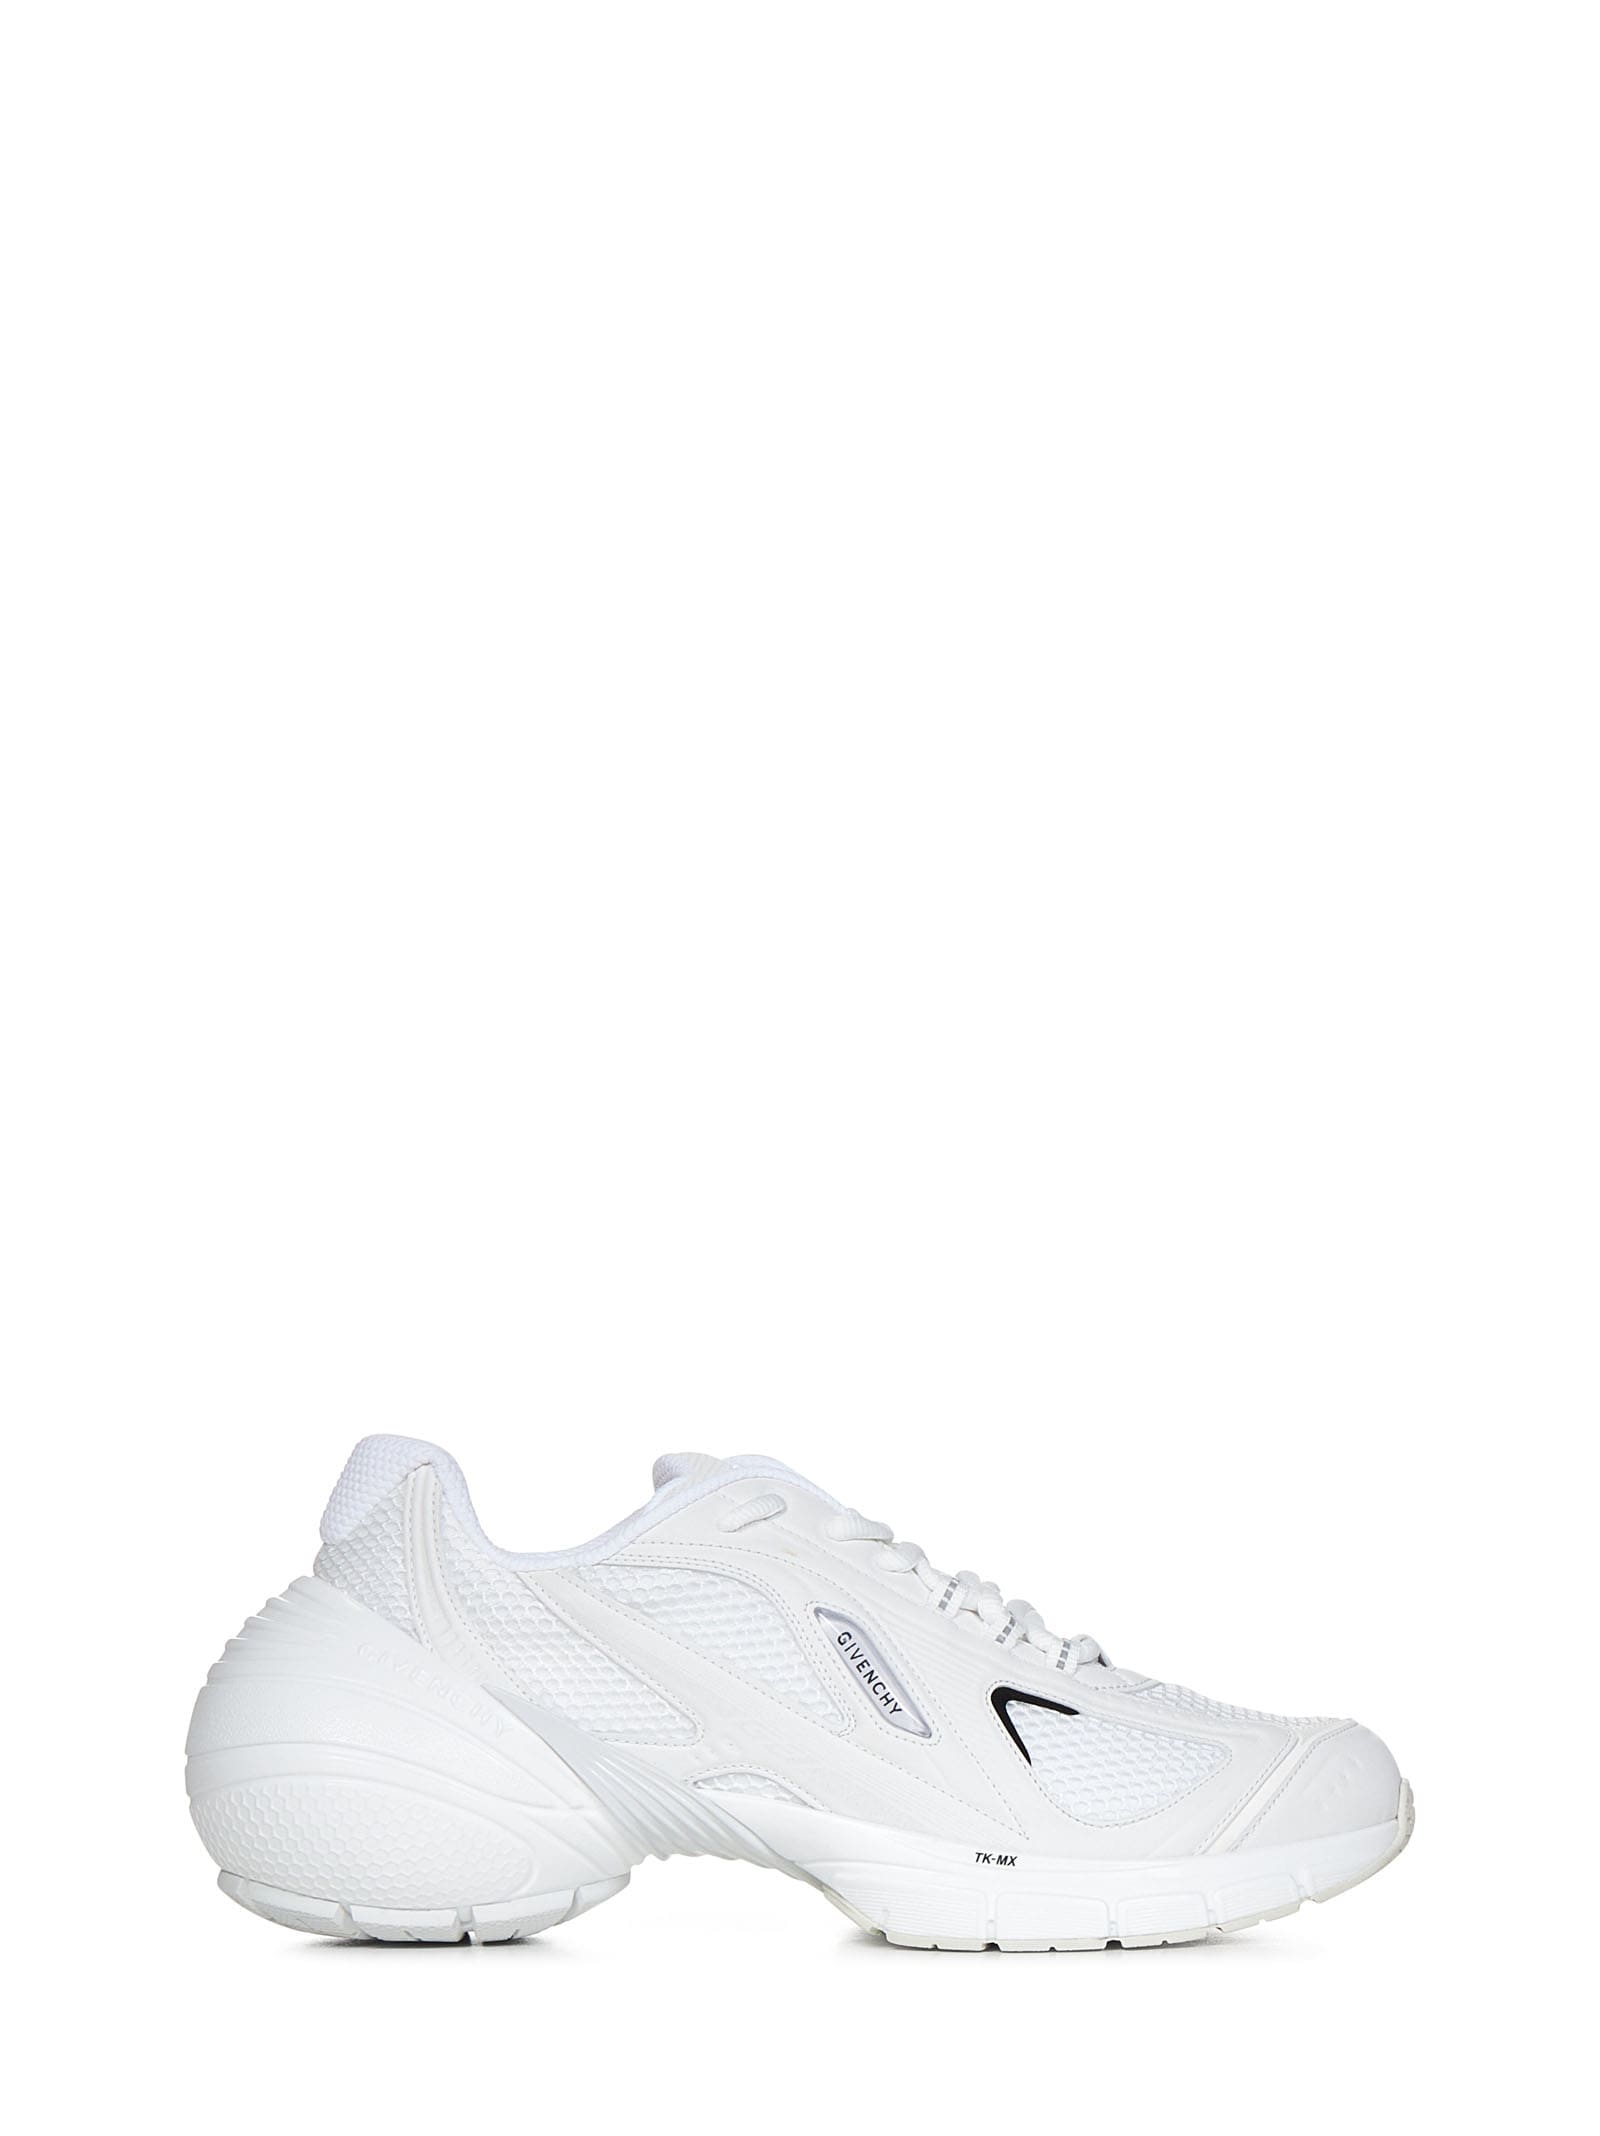 Givenchy Tk-mx Mesh, Rubber And Faux Leather Sneakers In White